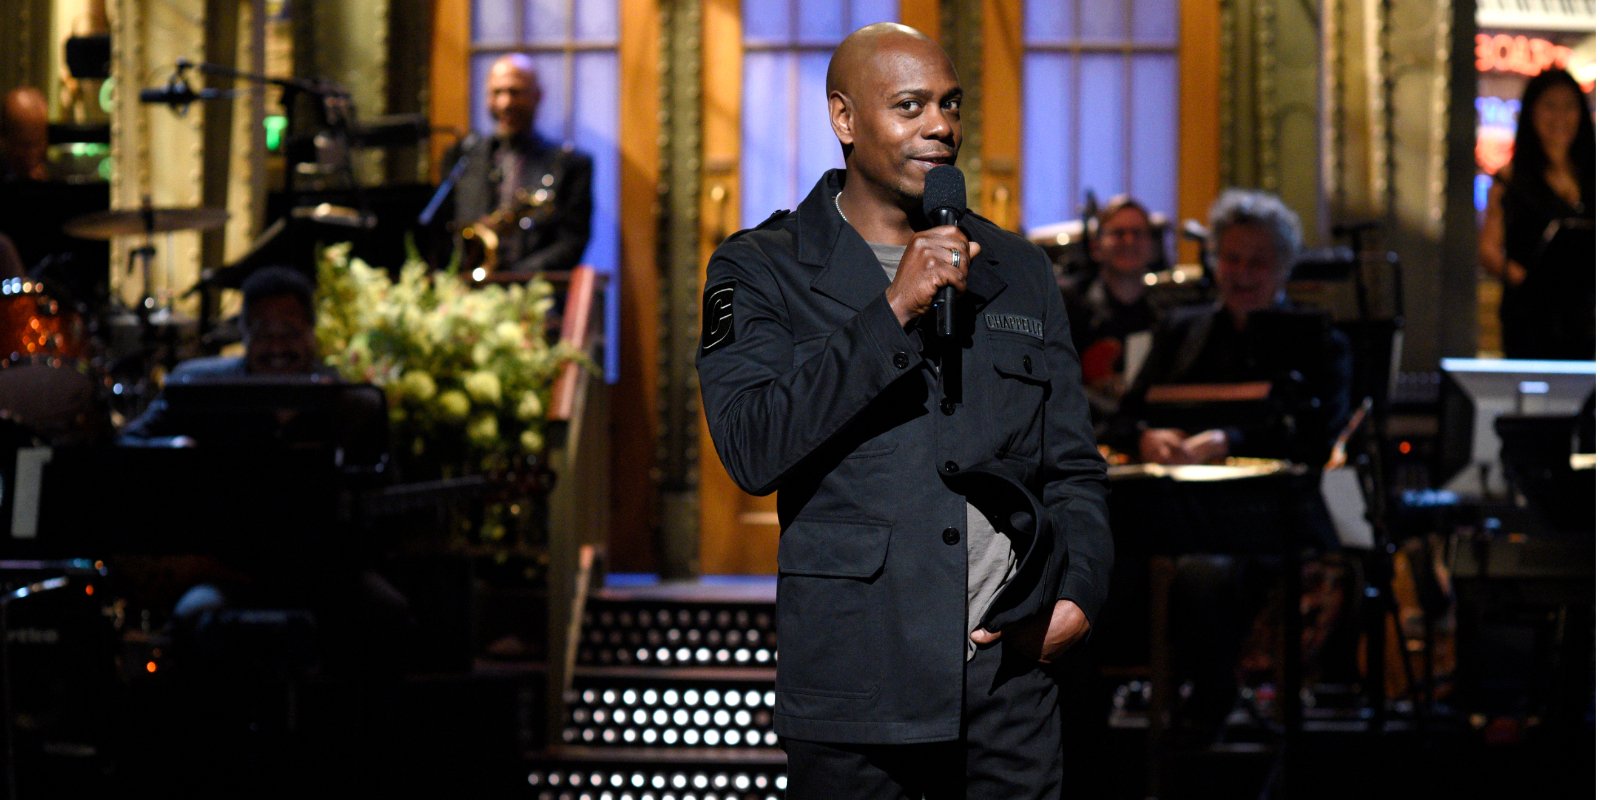 Dave Chappelle hosted 'Saturday Night Live' and performed monologue on November 12, 2016.